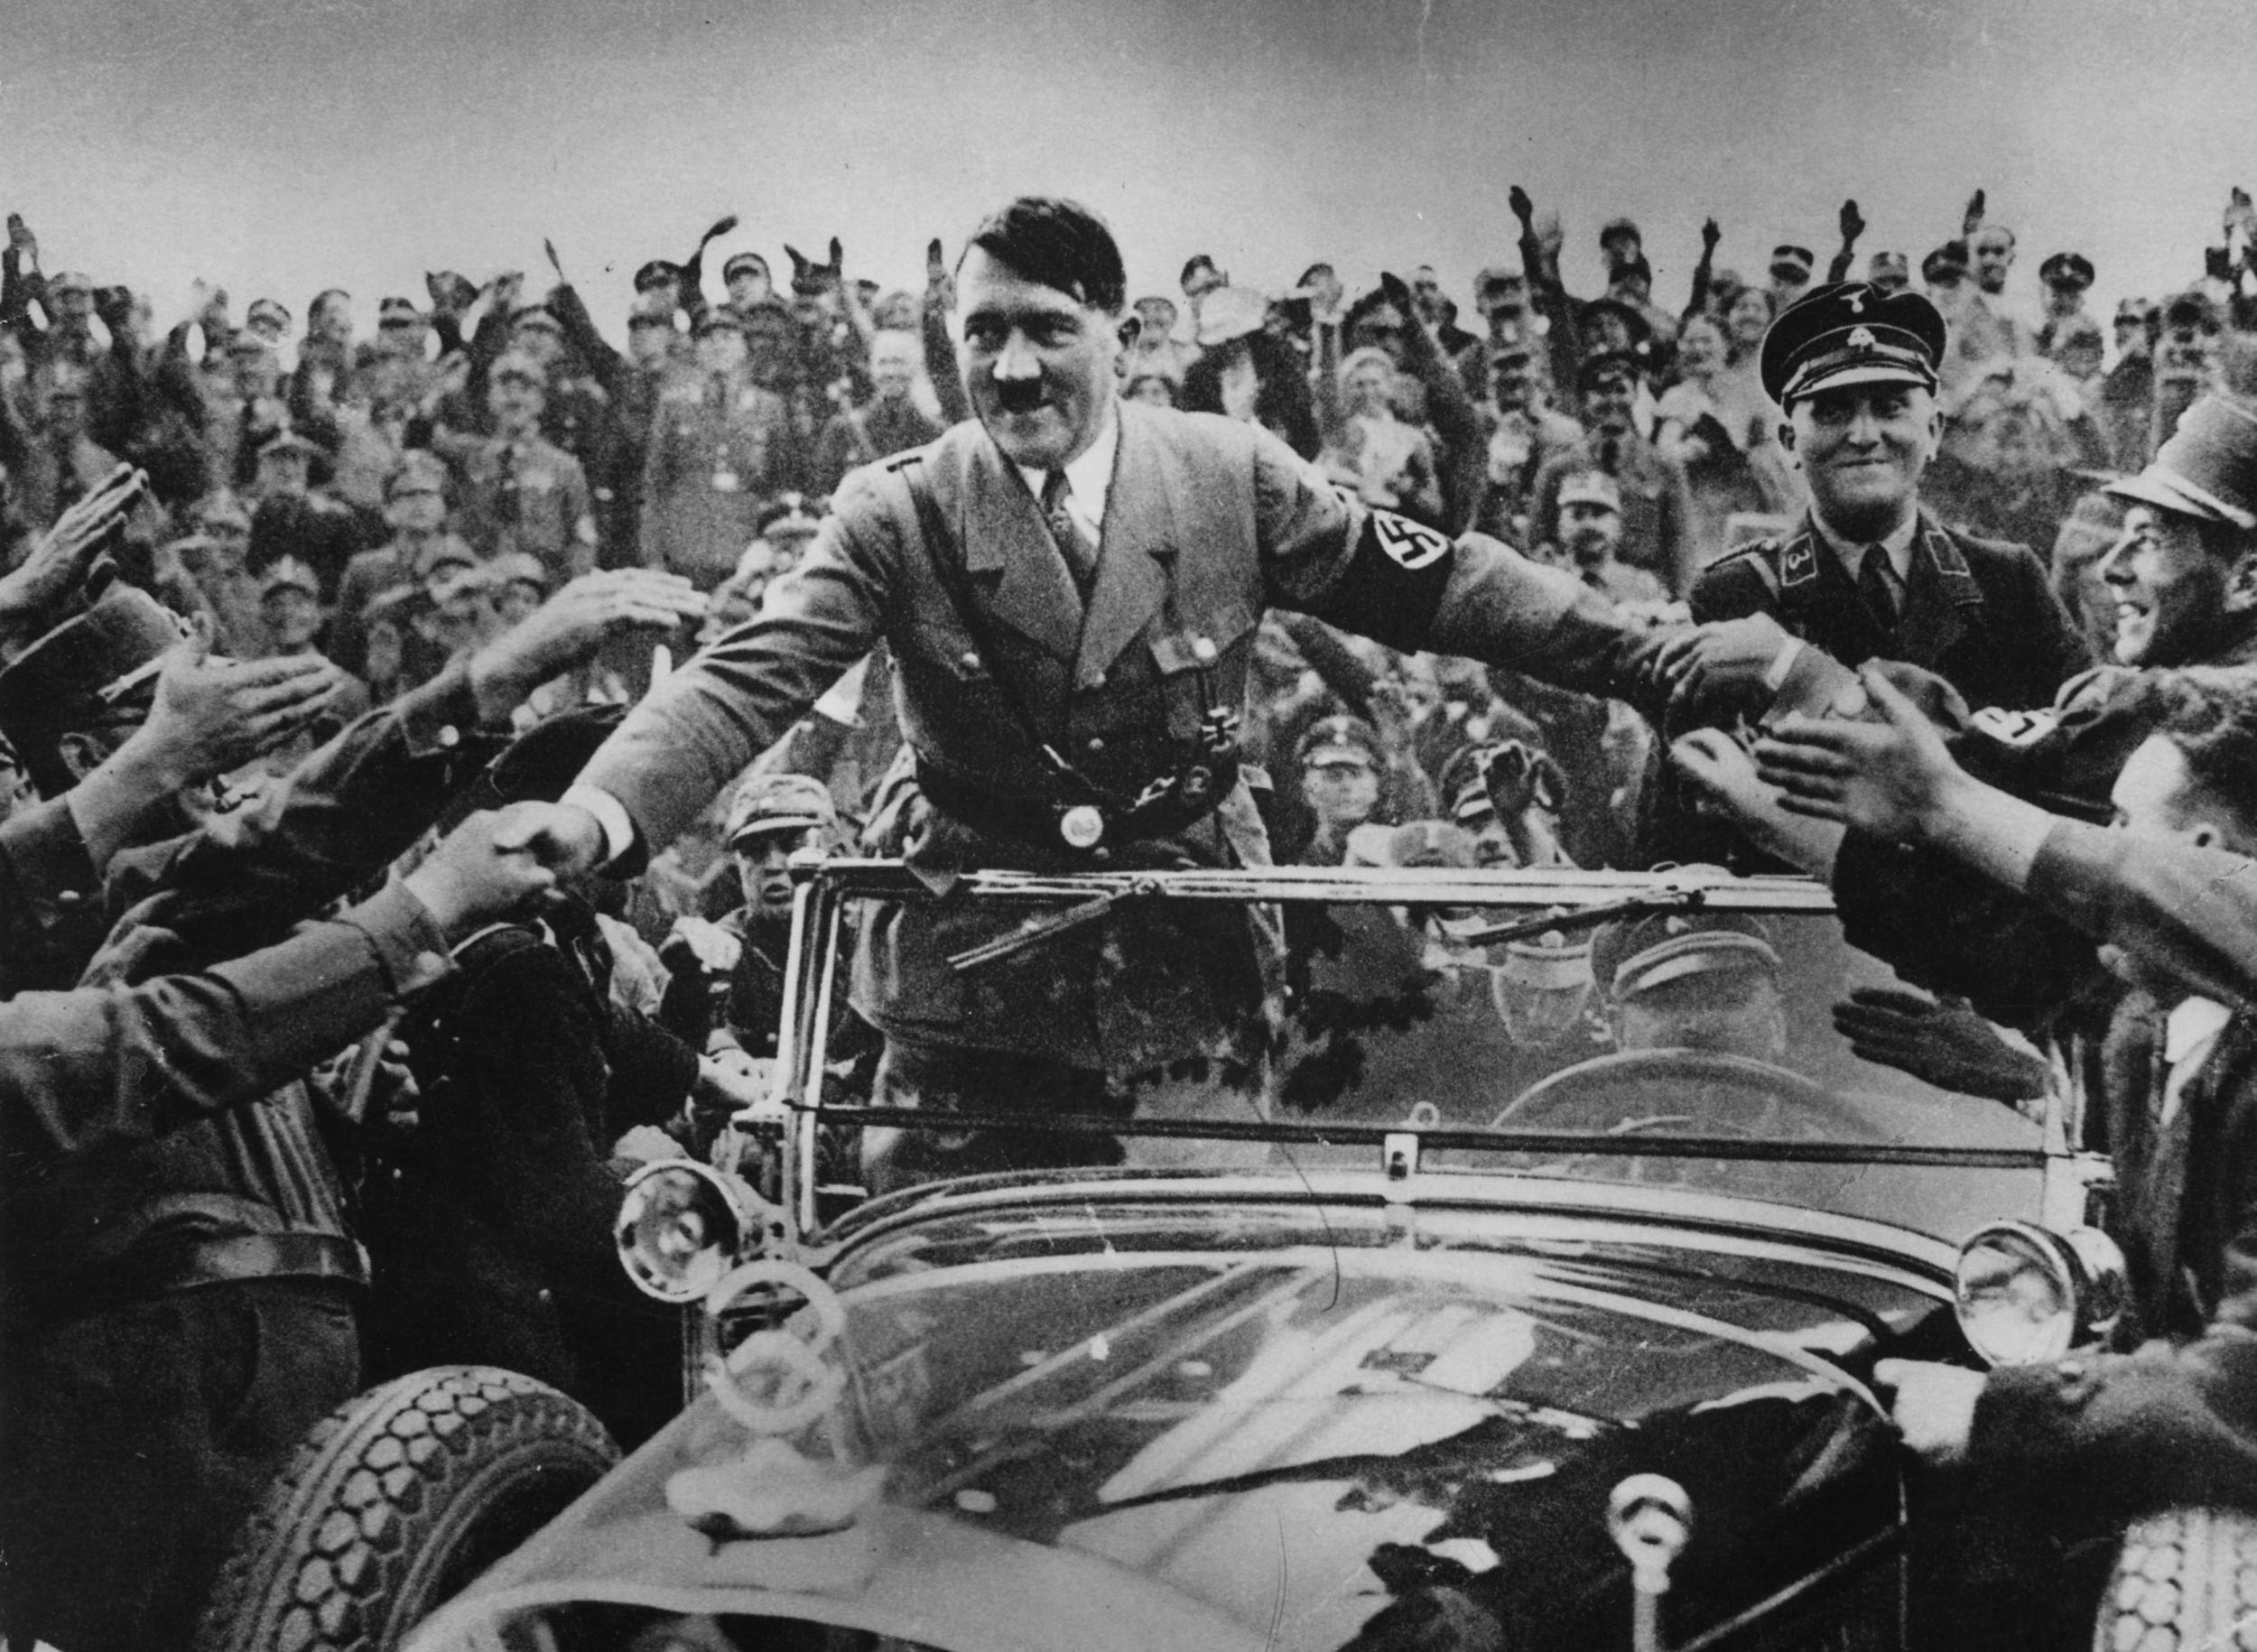 Adolf Hitler is considered to be responsible for the deaths of up to 11 million people